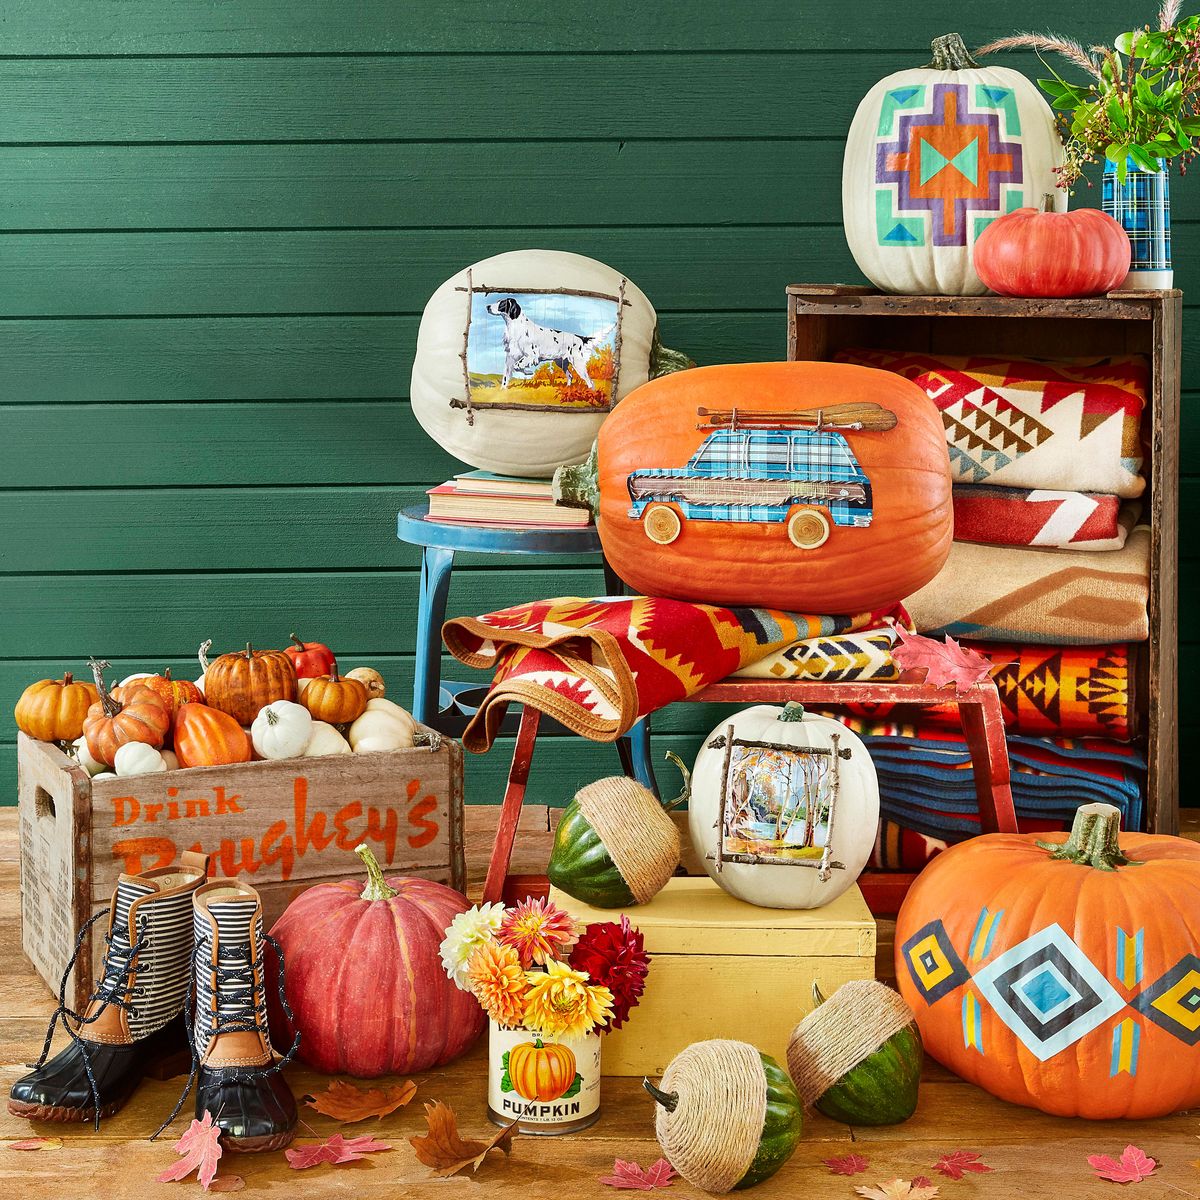 fall pumpkin display styled with mud boots, pendleton blankets, vintage crates and stools, green cabin wall backdrop